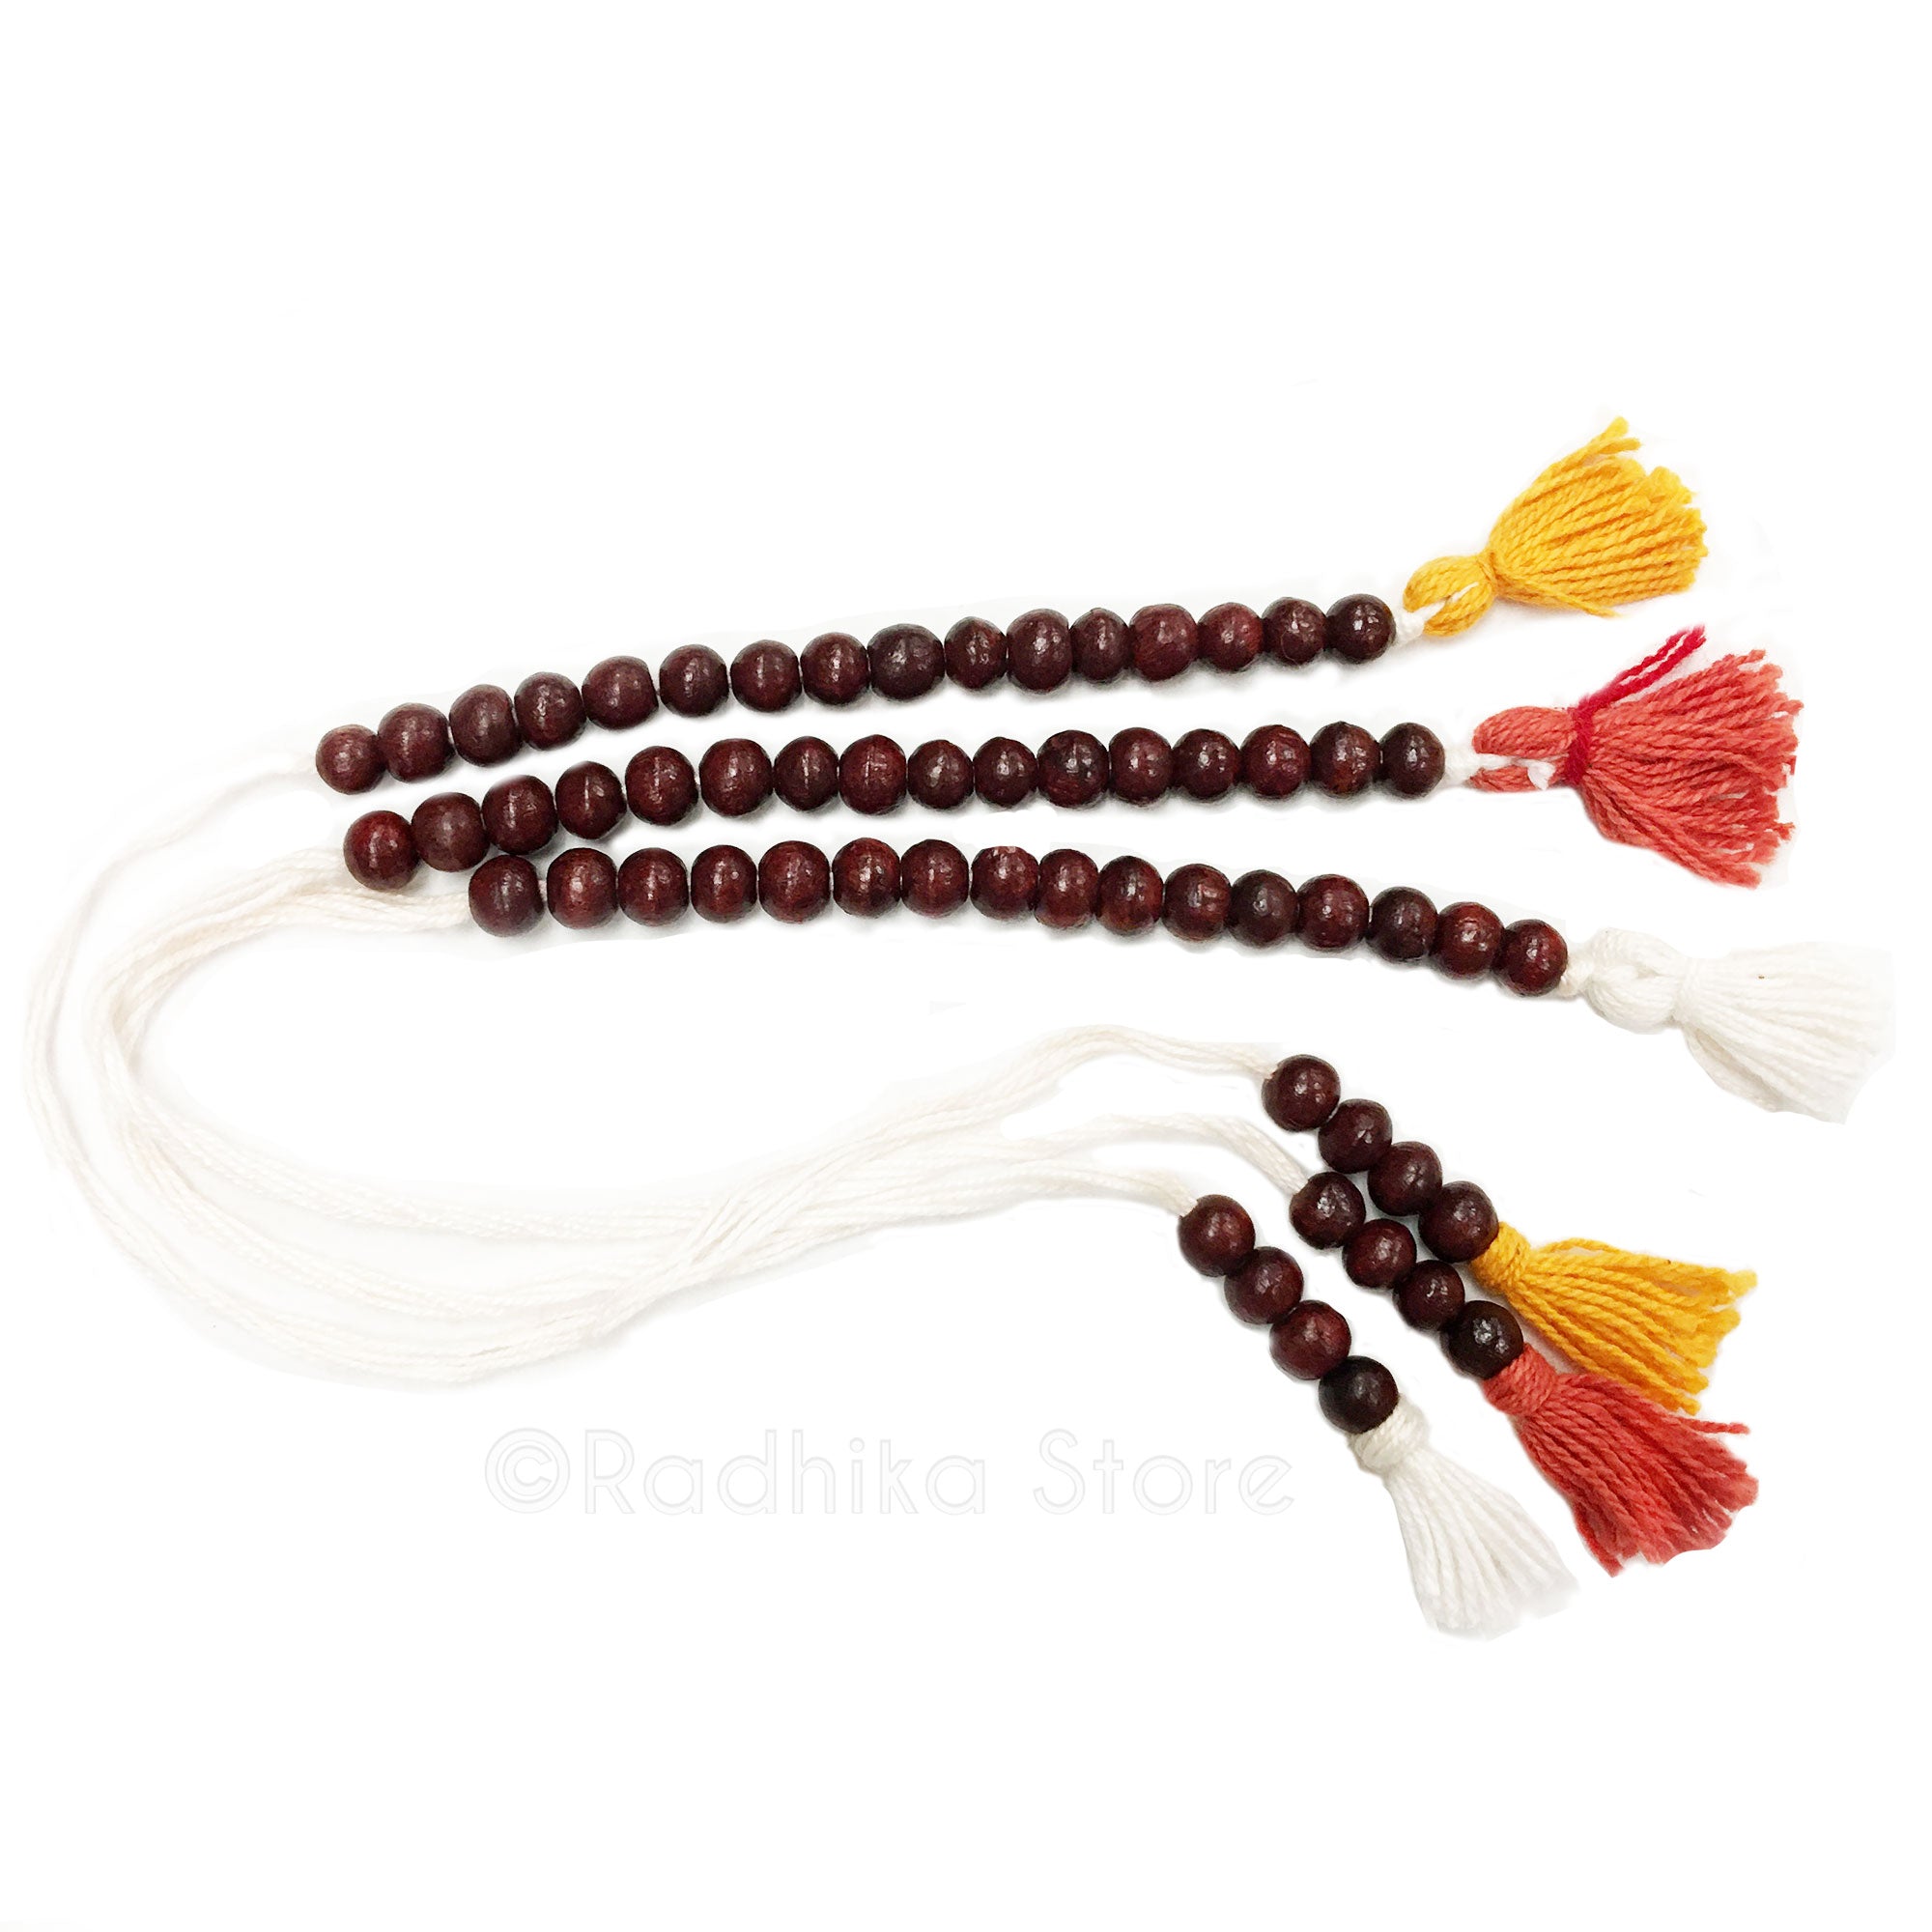 Rosewood Japa Counting Beads